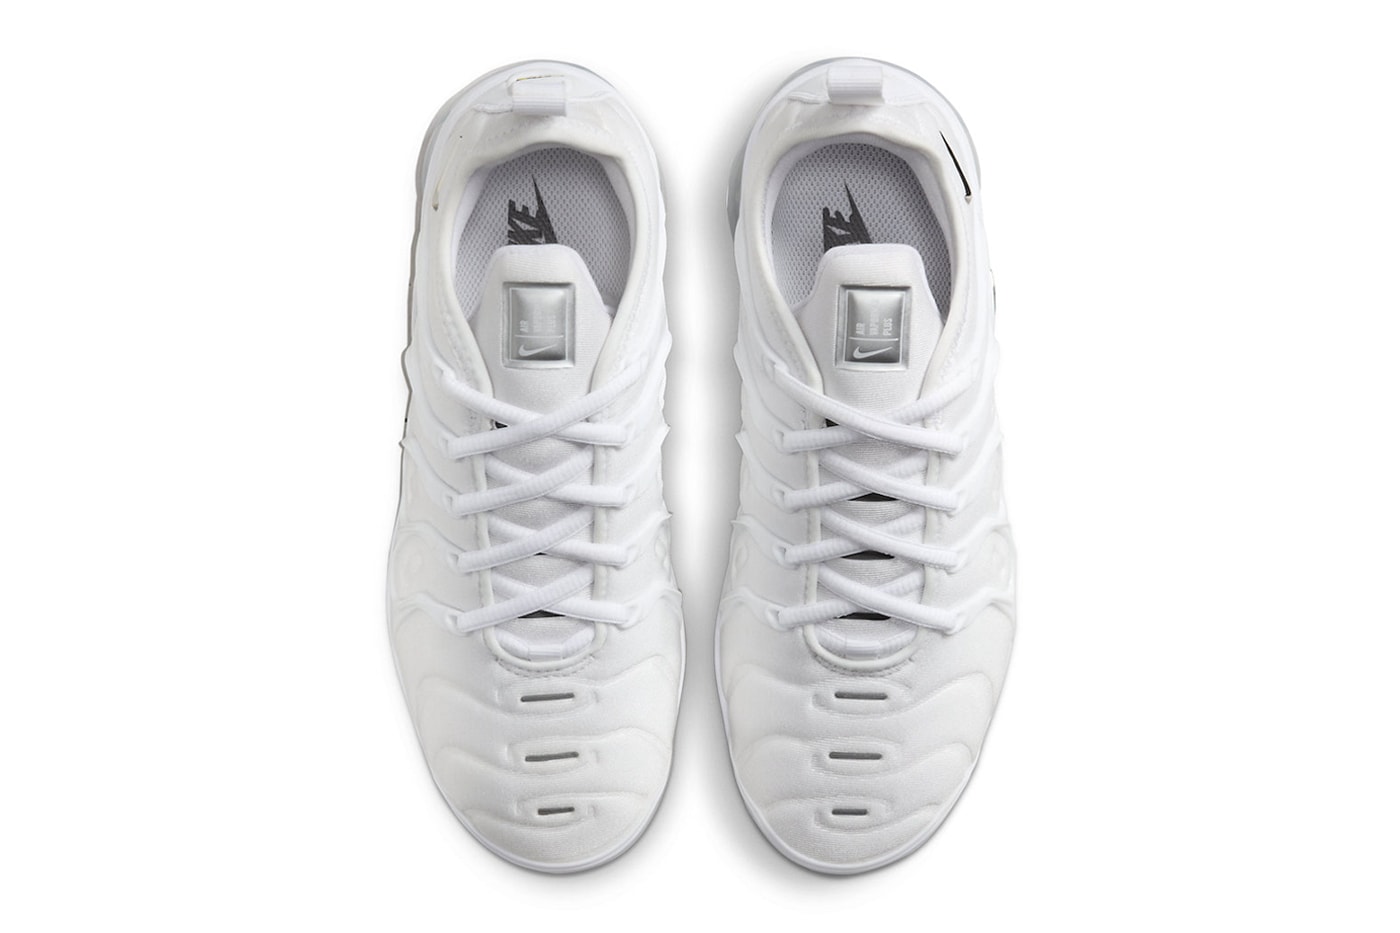 Official Look at the Nike Air VaporMax Plus "White Chrome" FQ8895-100 winter holiday 2023 air max triple white sole unit footwear sneaker